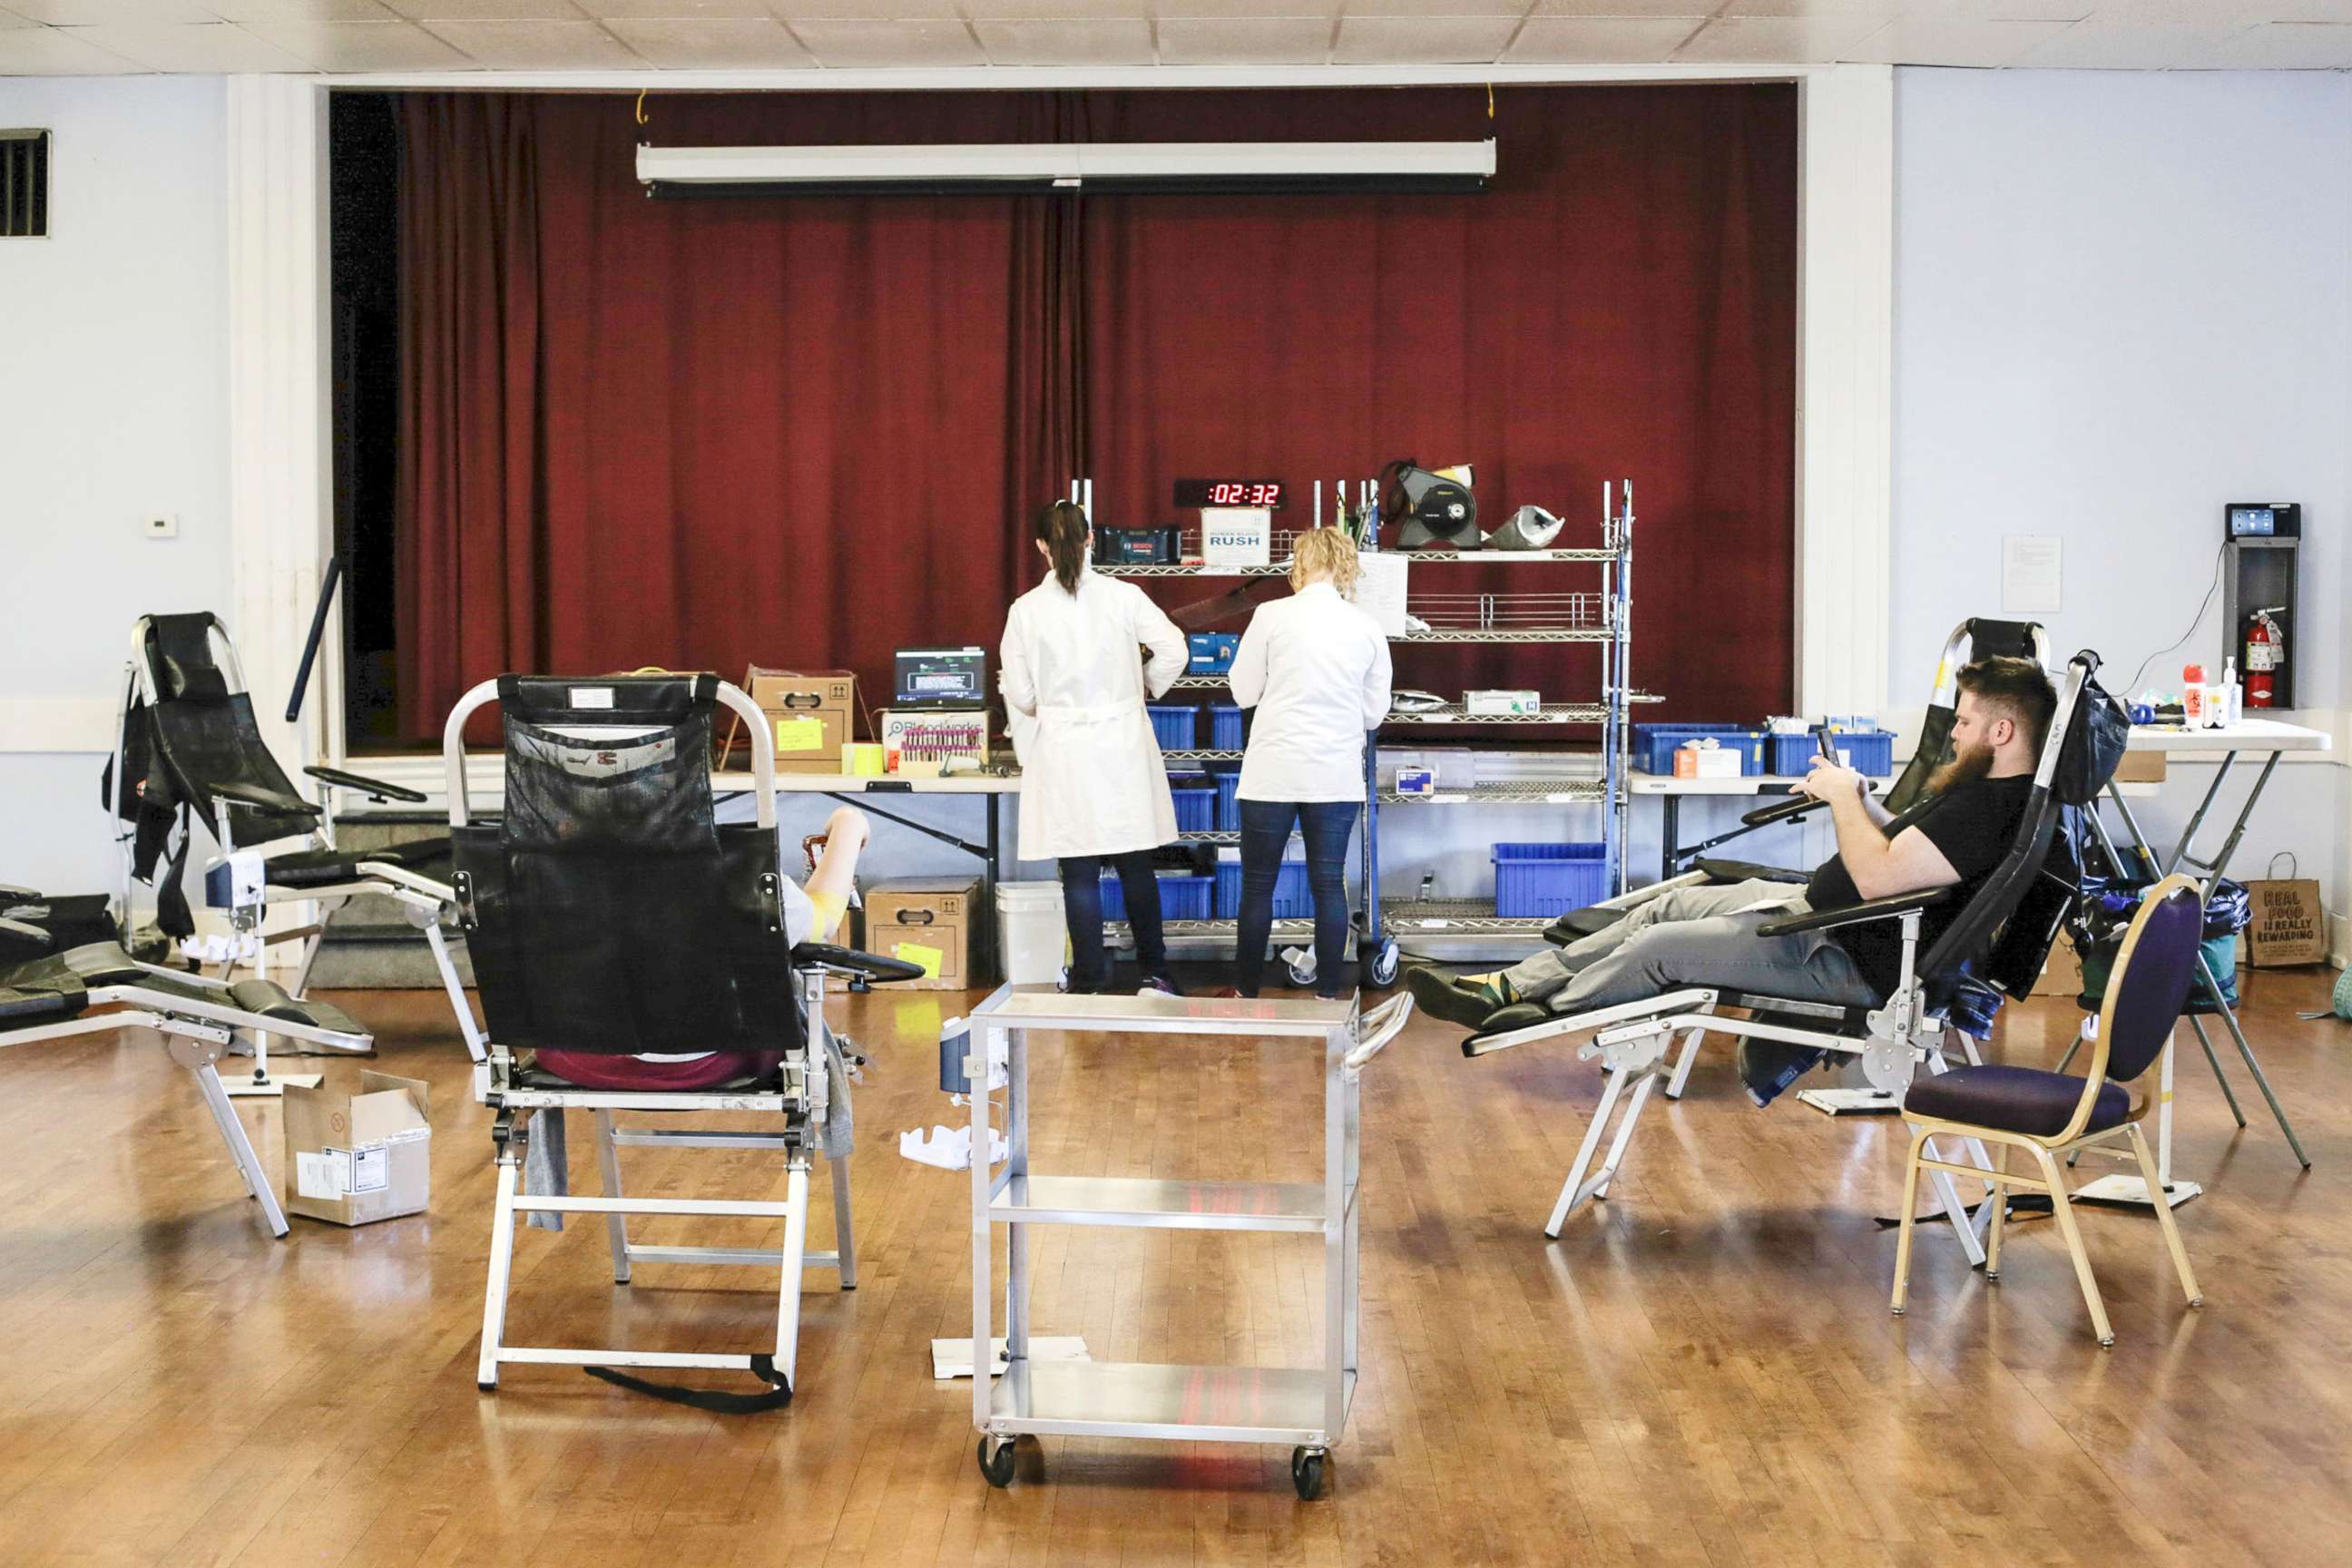 PHOTO: Donors rest as phlebotomists work during a blood drive at the Shoreline Masonic Lodge in Shoreline, Wash., March 15, 2020.